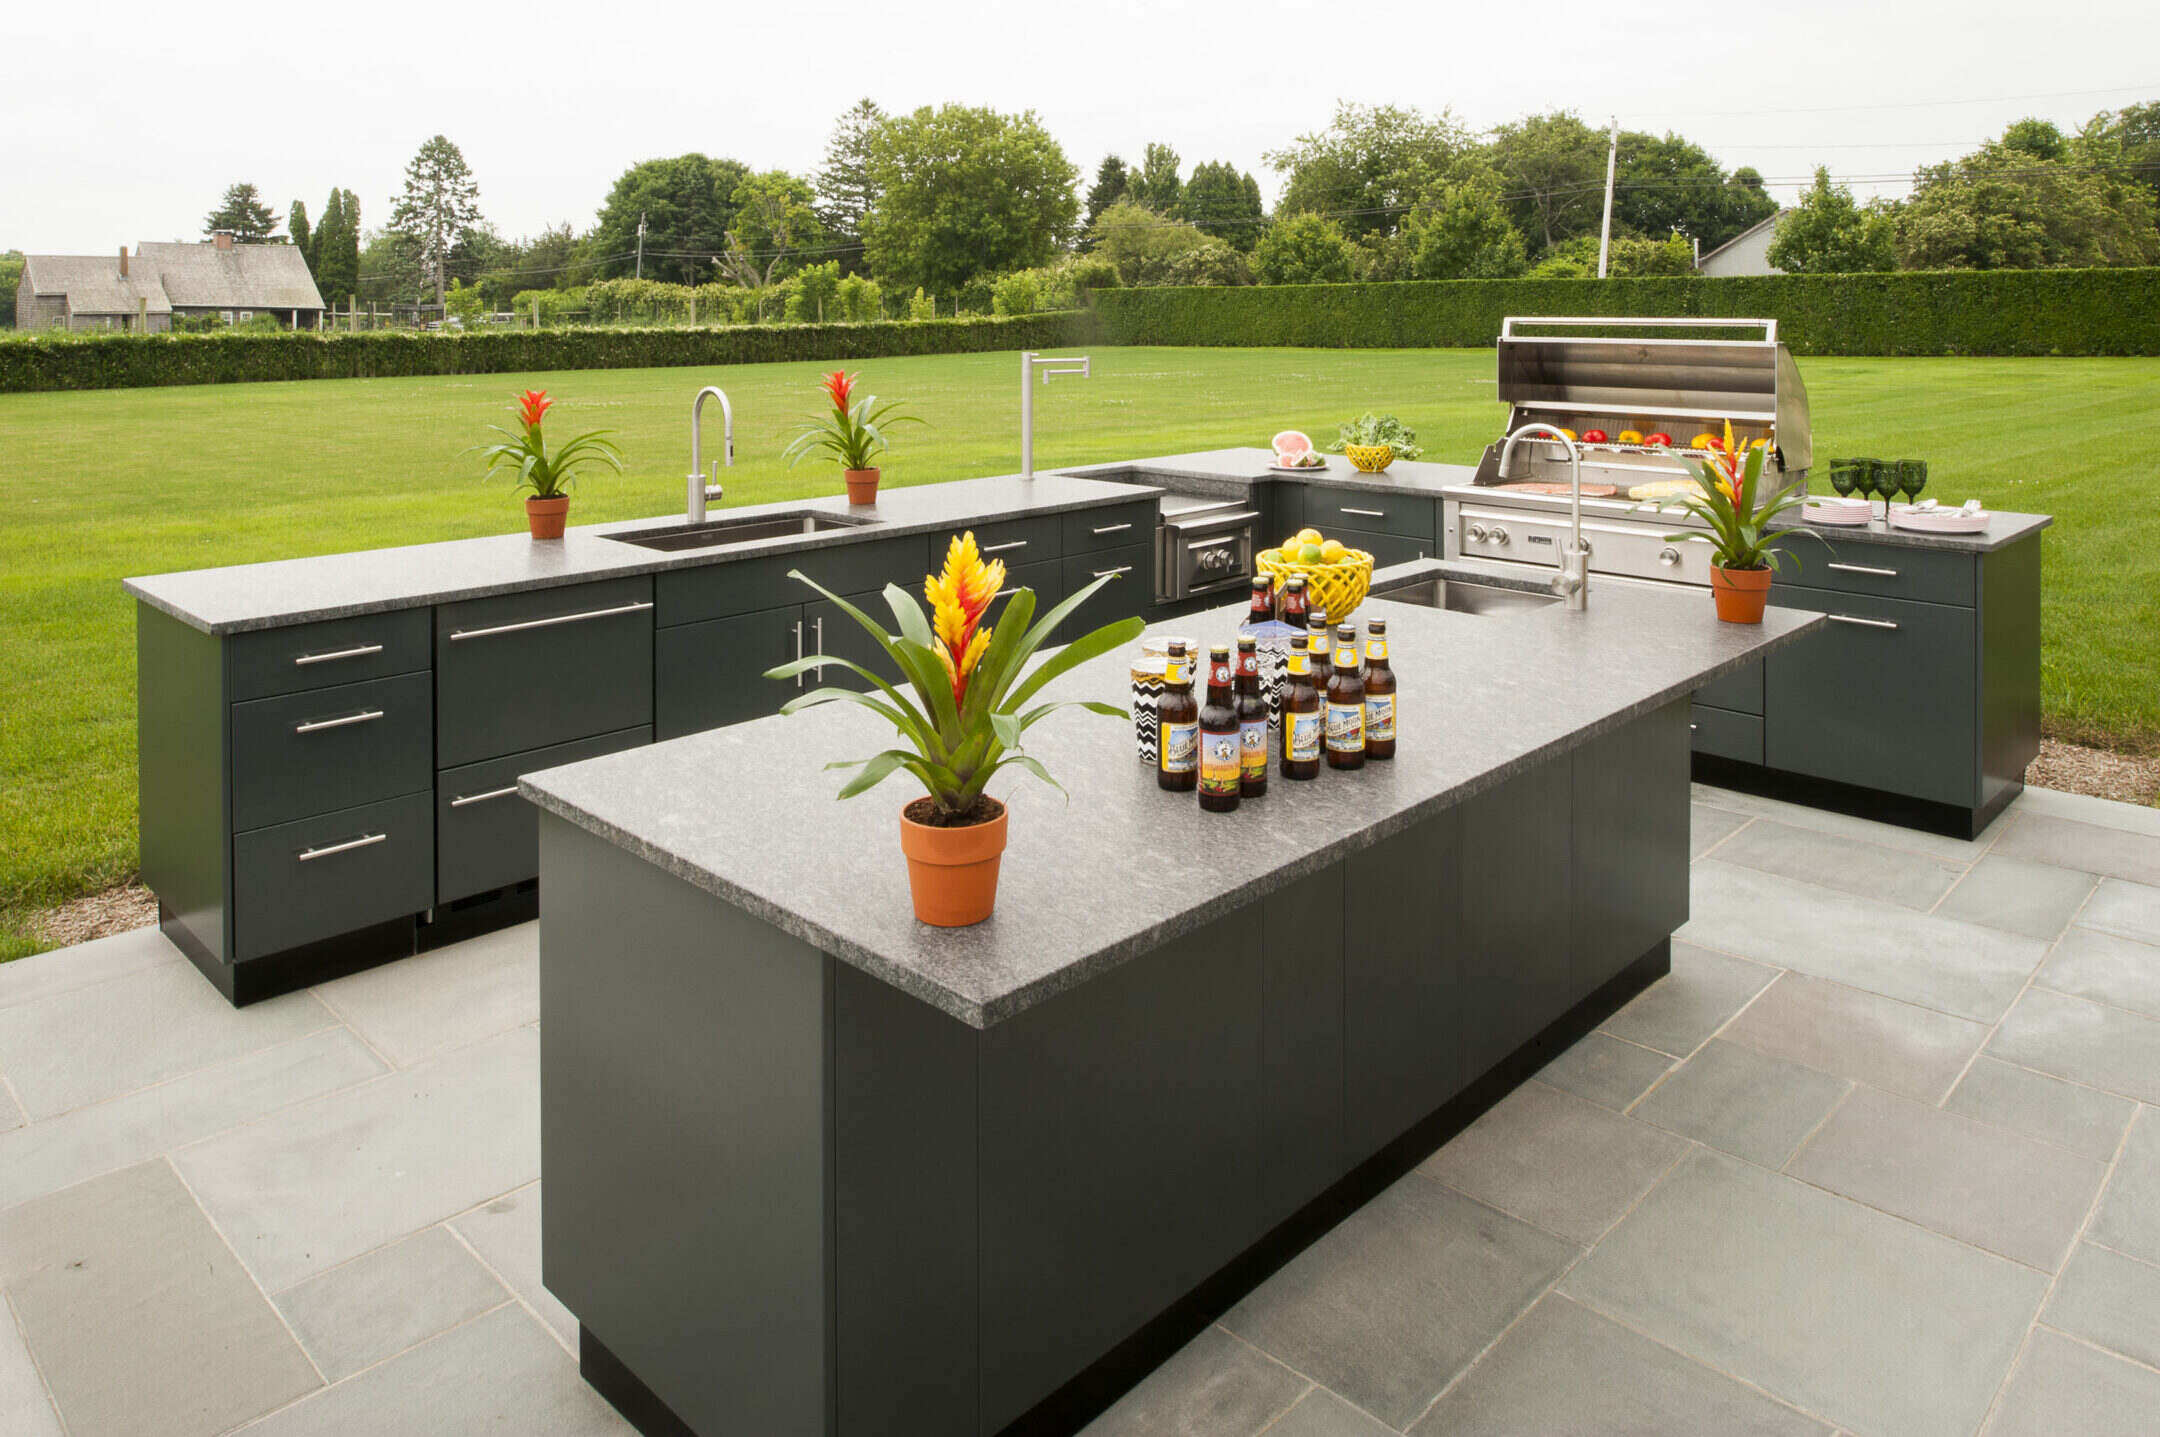 What Is The Best Countertop Material For Outdoor Kitchen